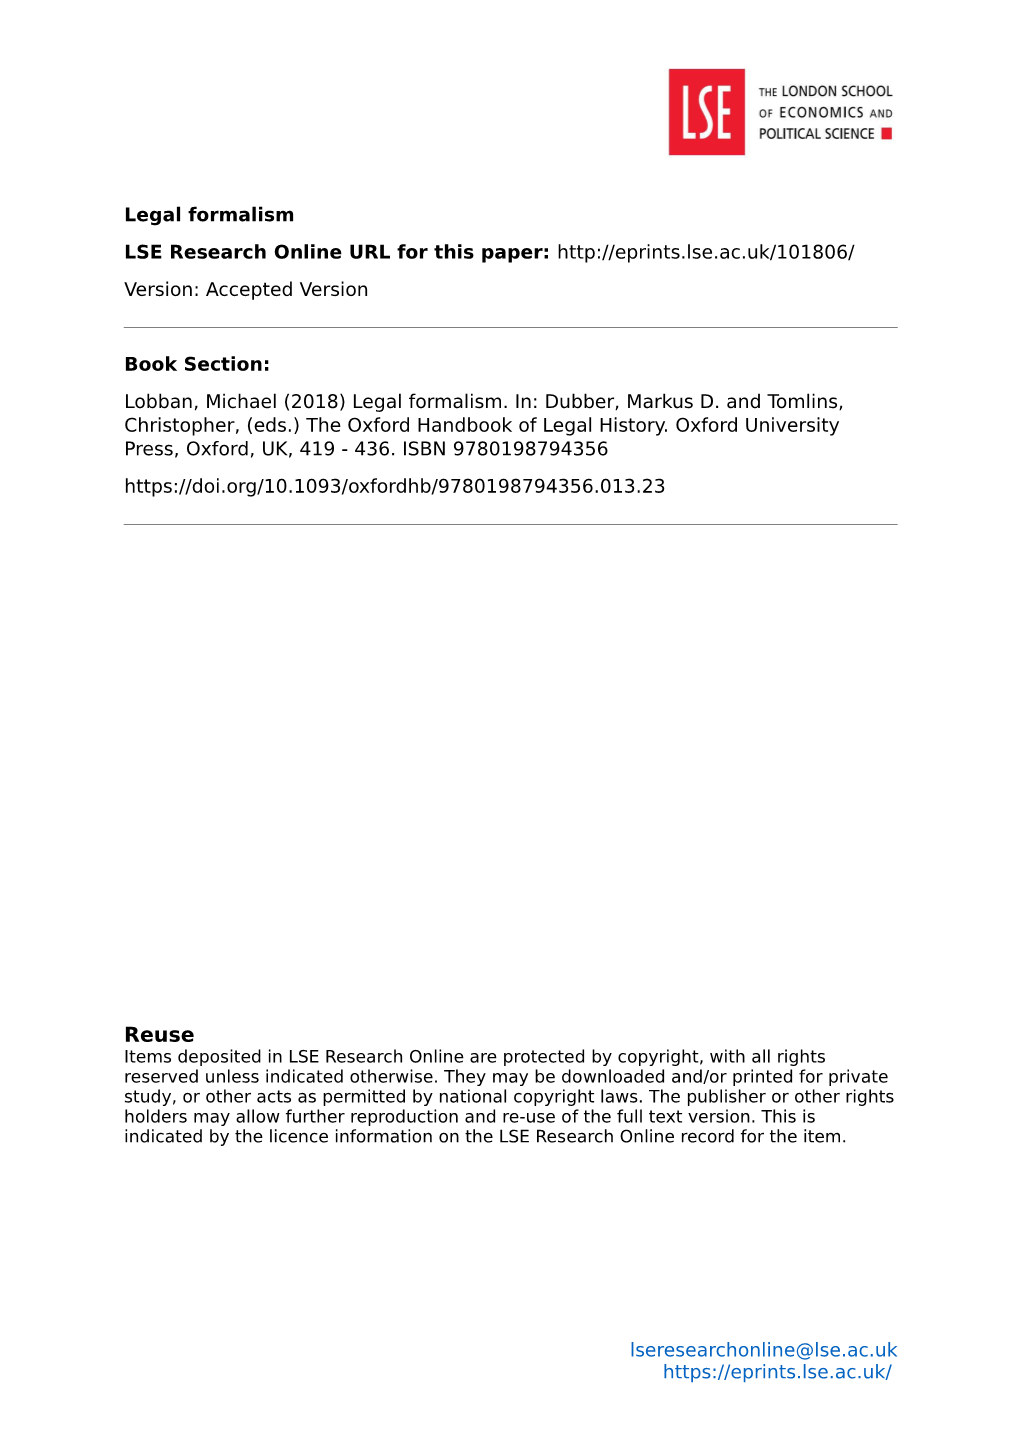 Legal Formalism LSE Research Online URL for This Paper: Version: Accepted Version